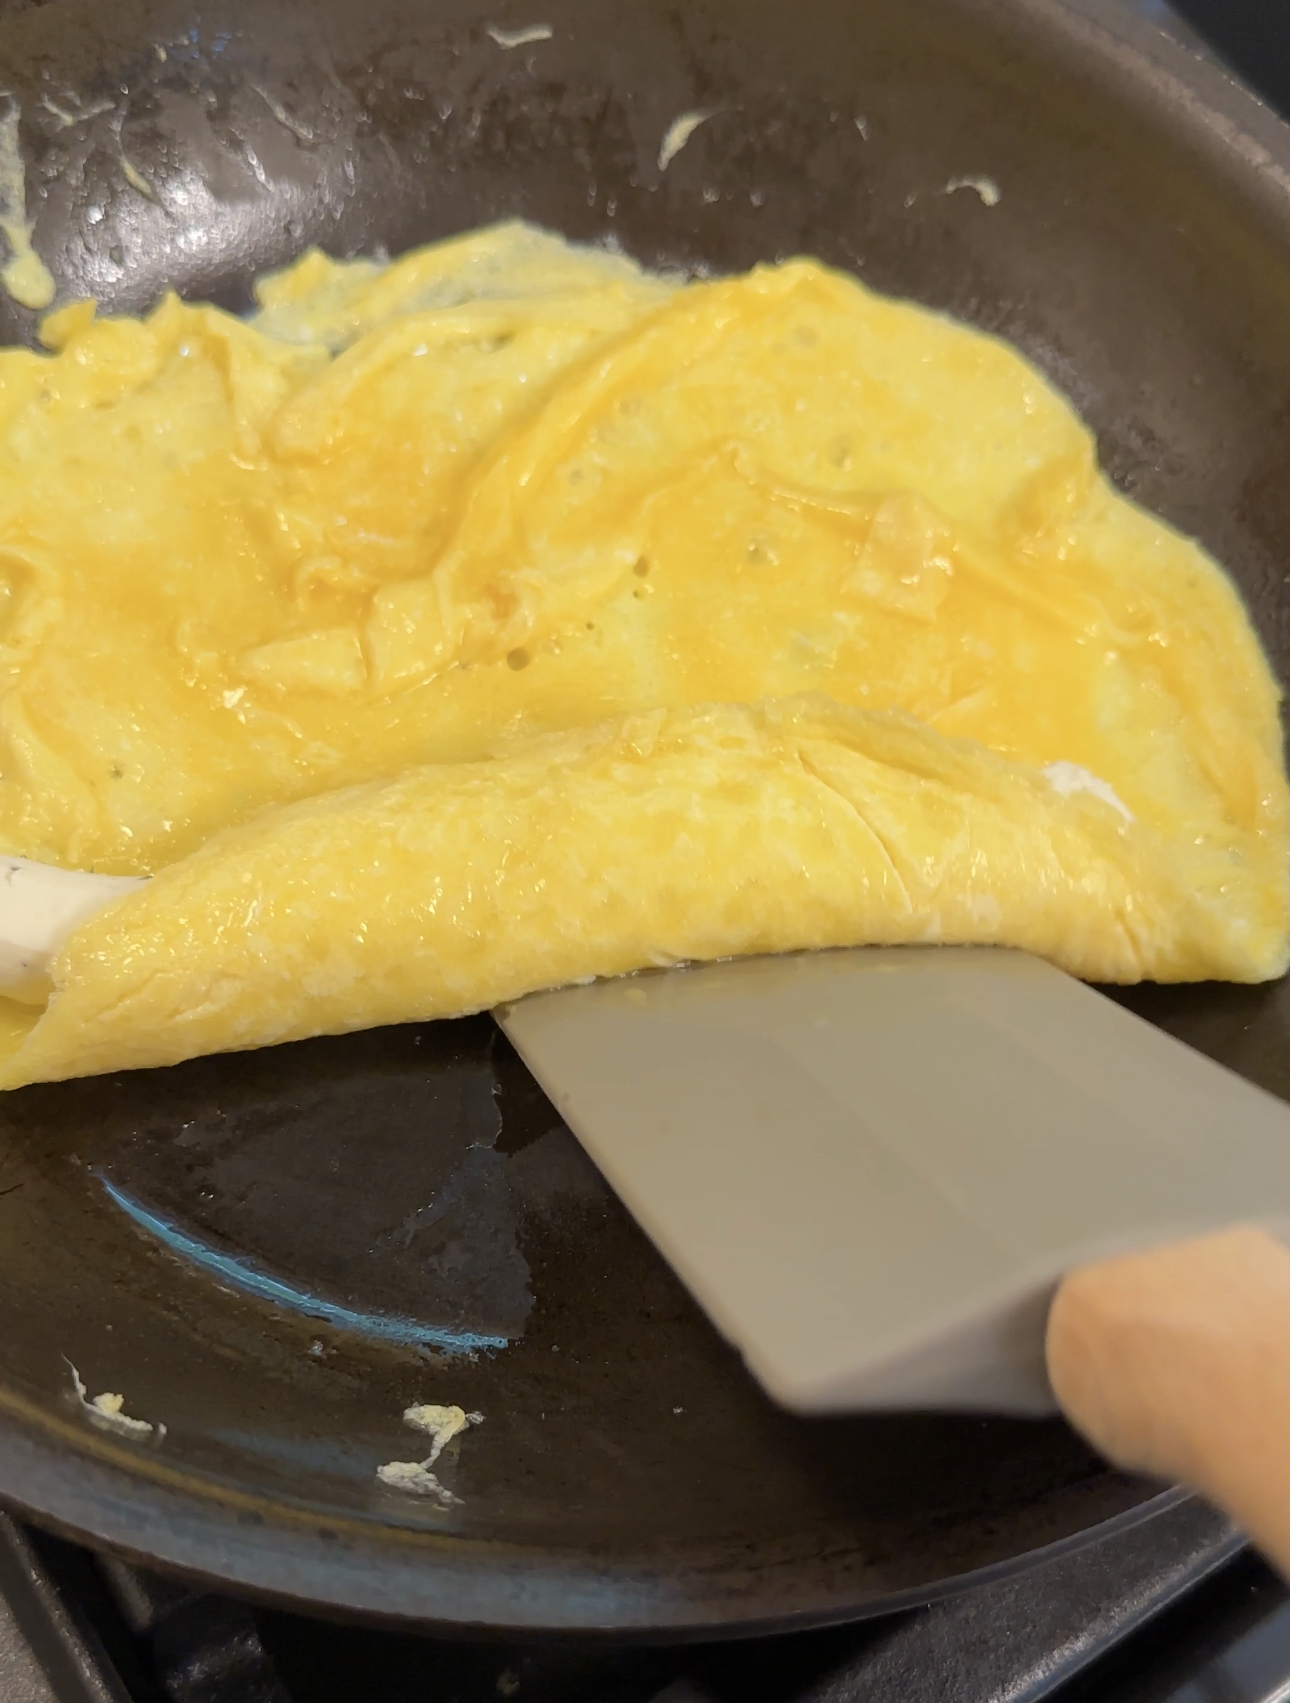 folding up the omelet with a rubber spatula